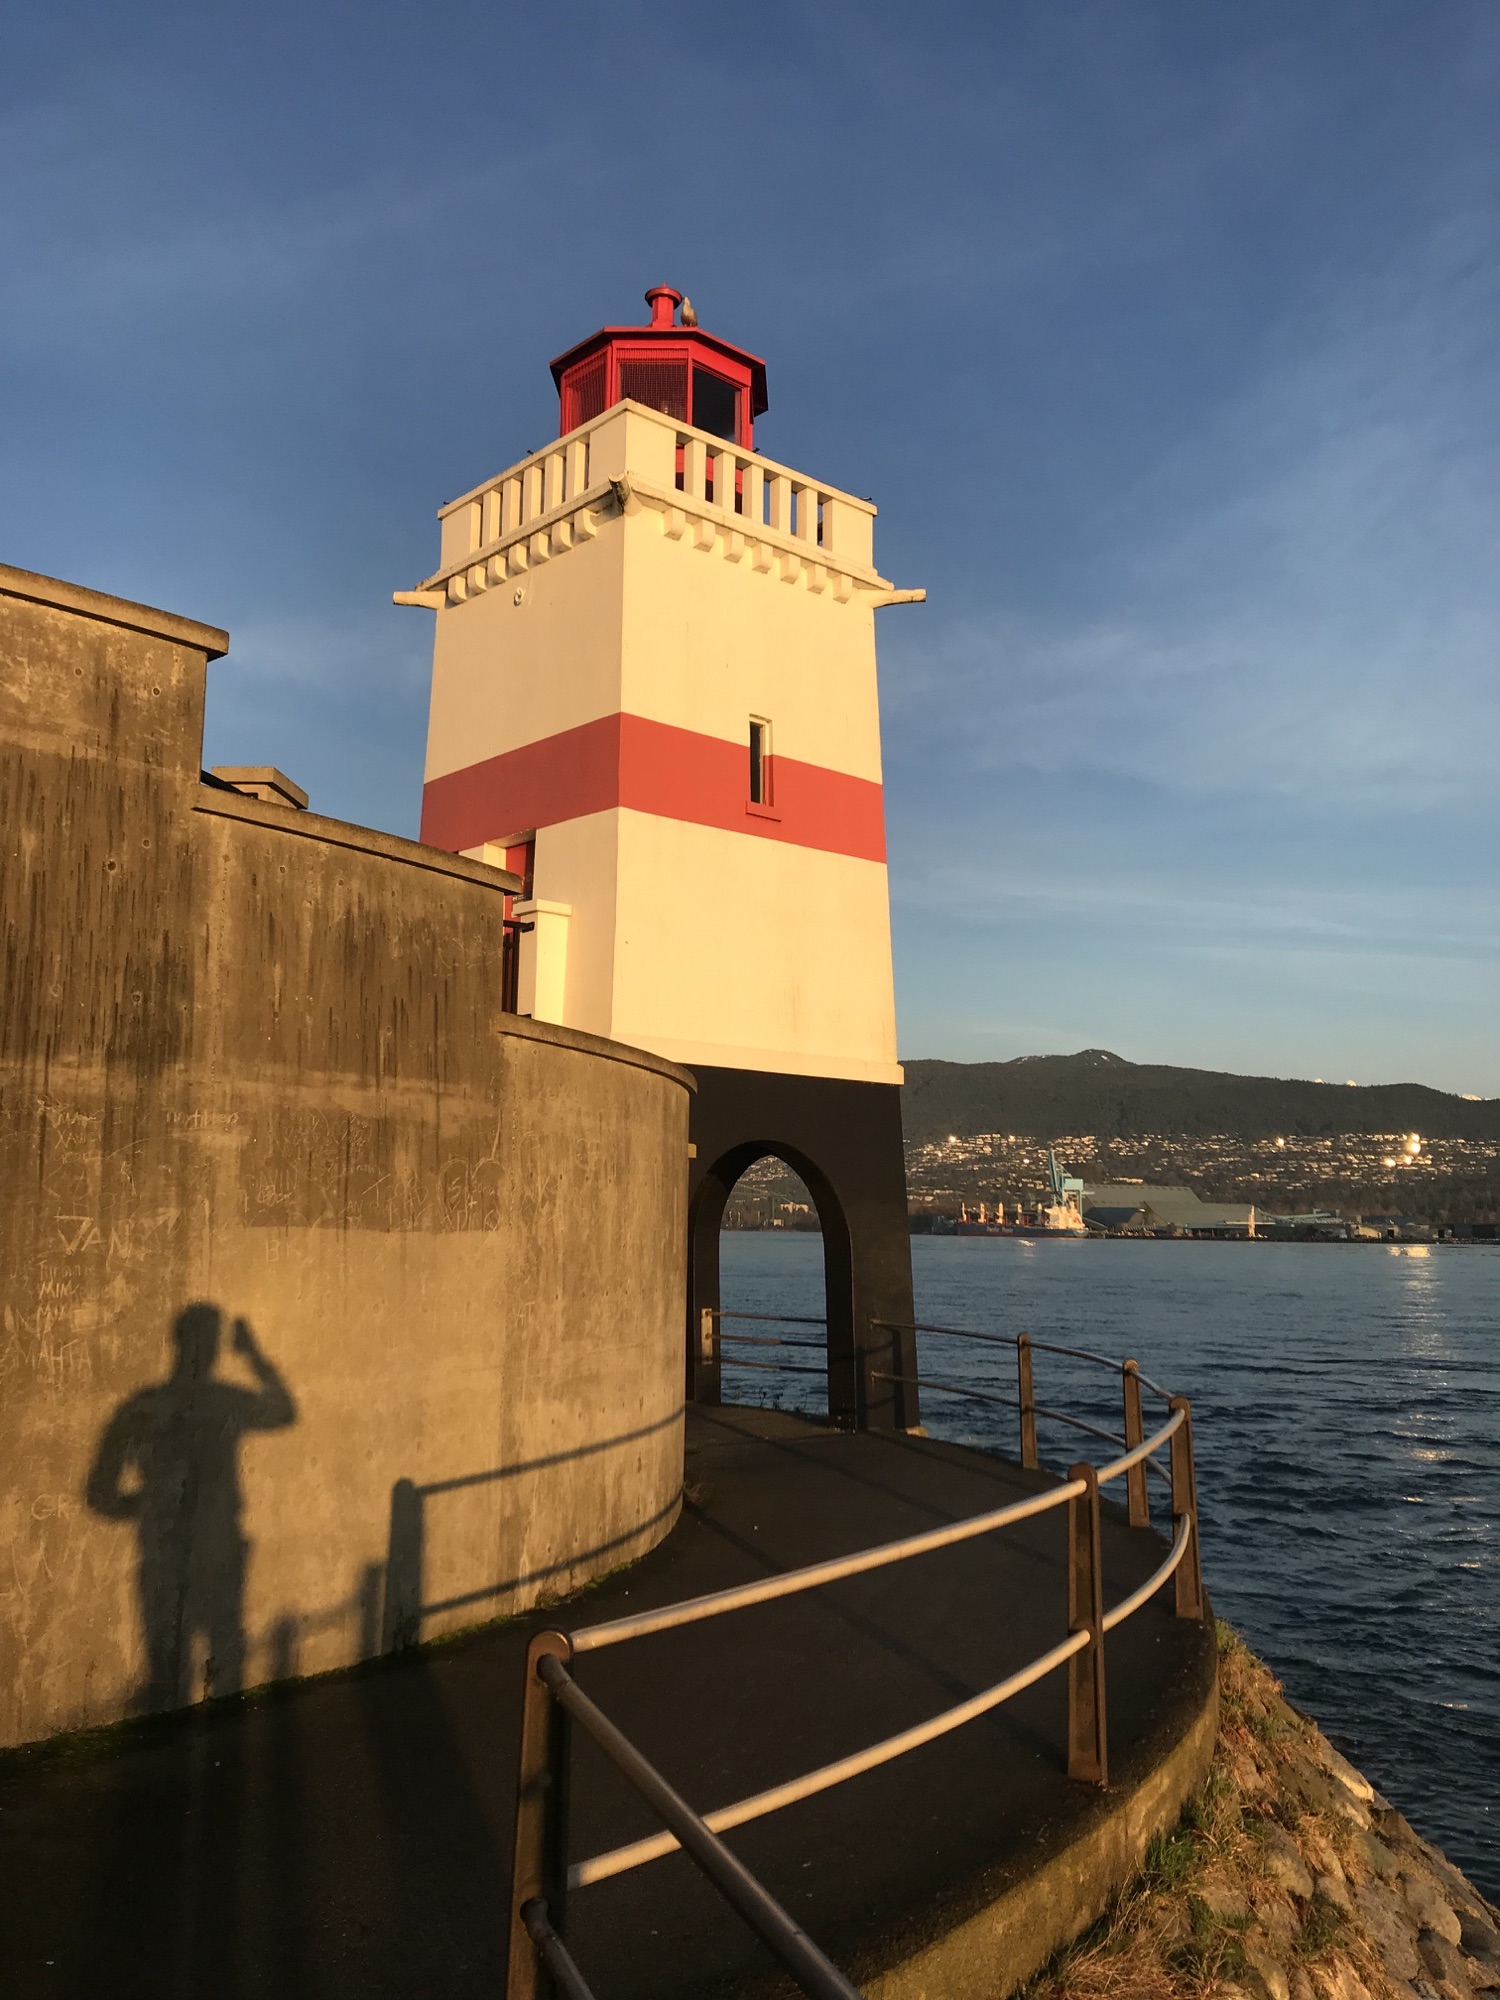 Running at the seawall of Vancouver